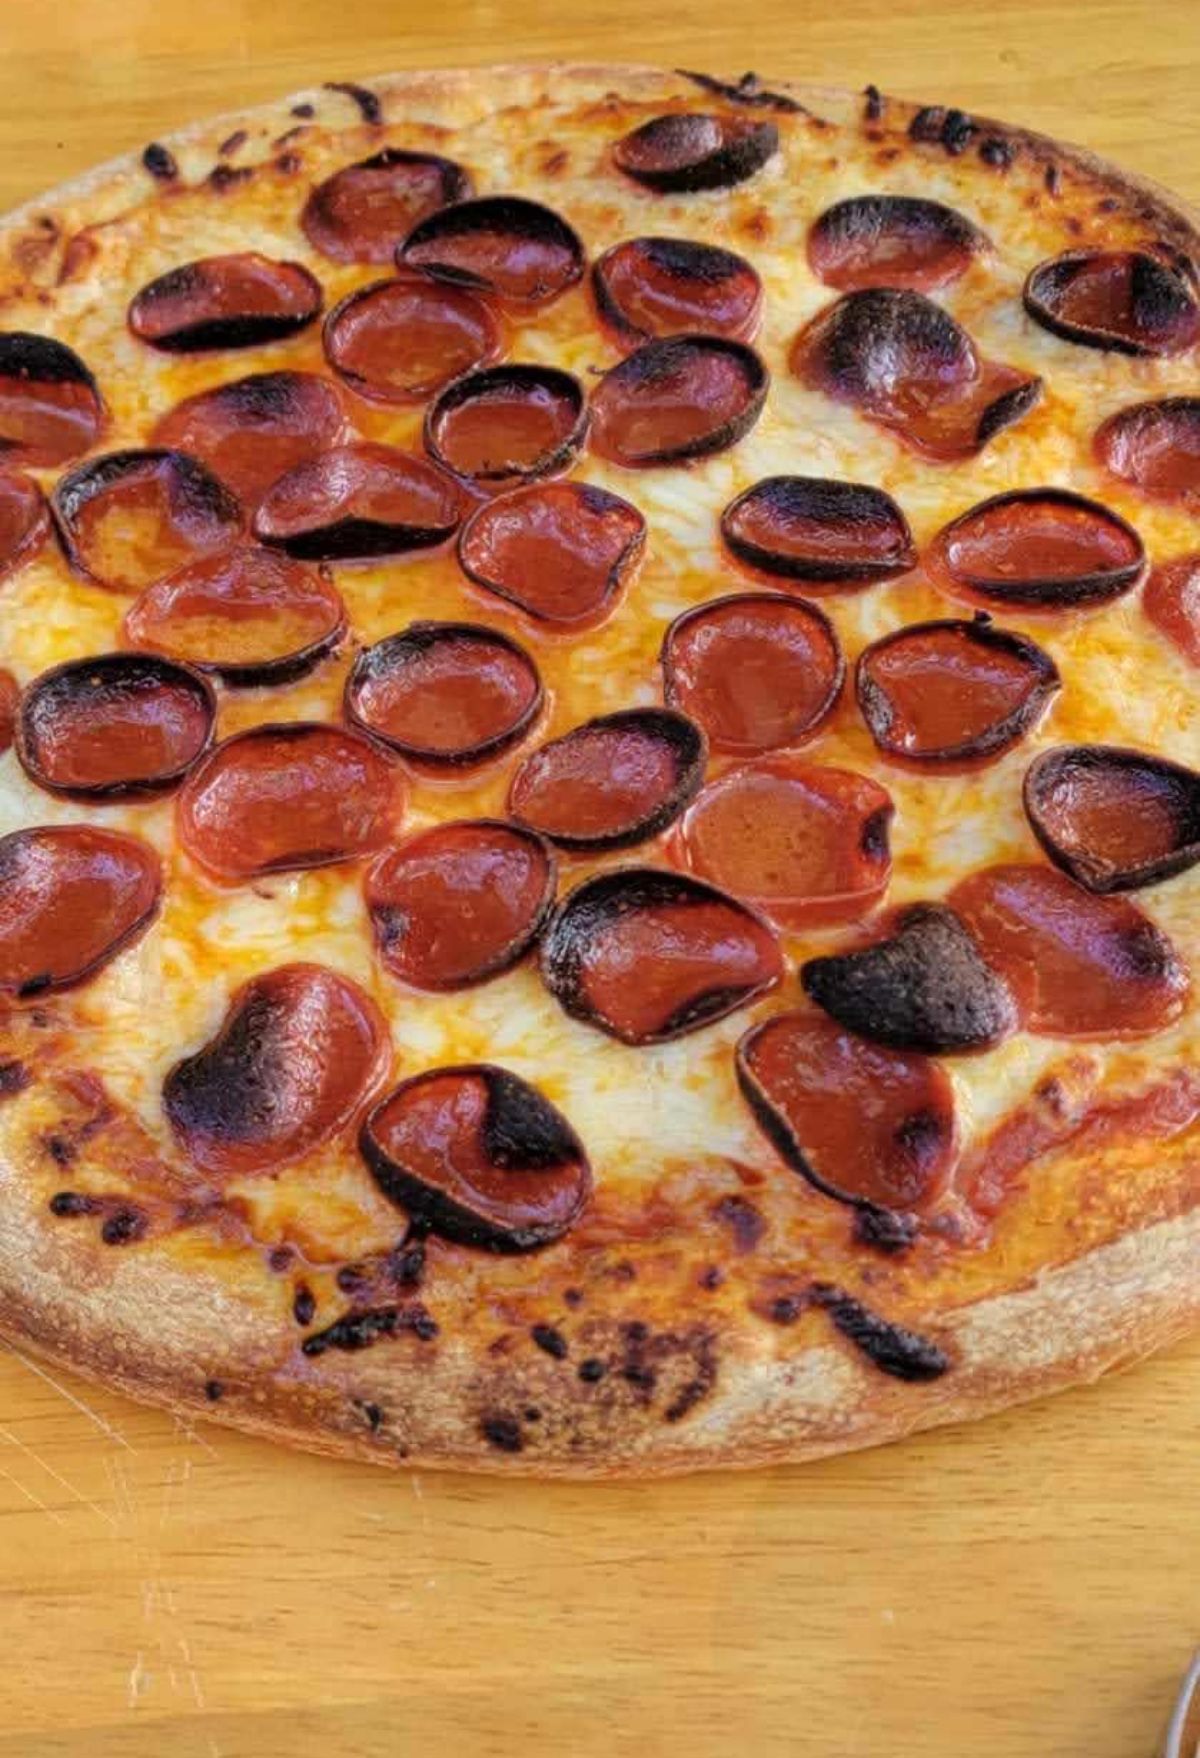 A pepperoni pizza on a wooden table.